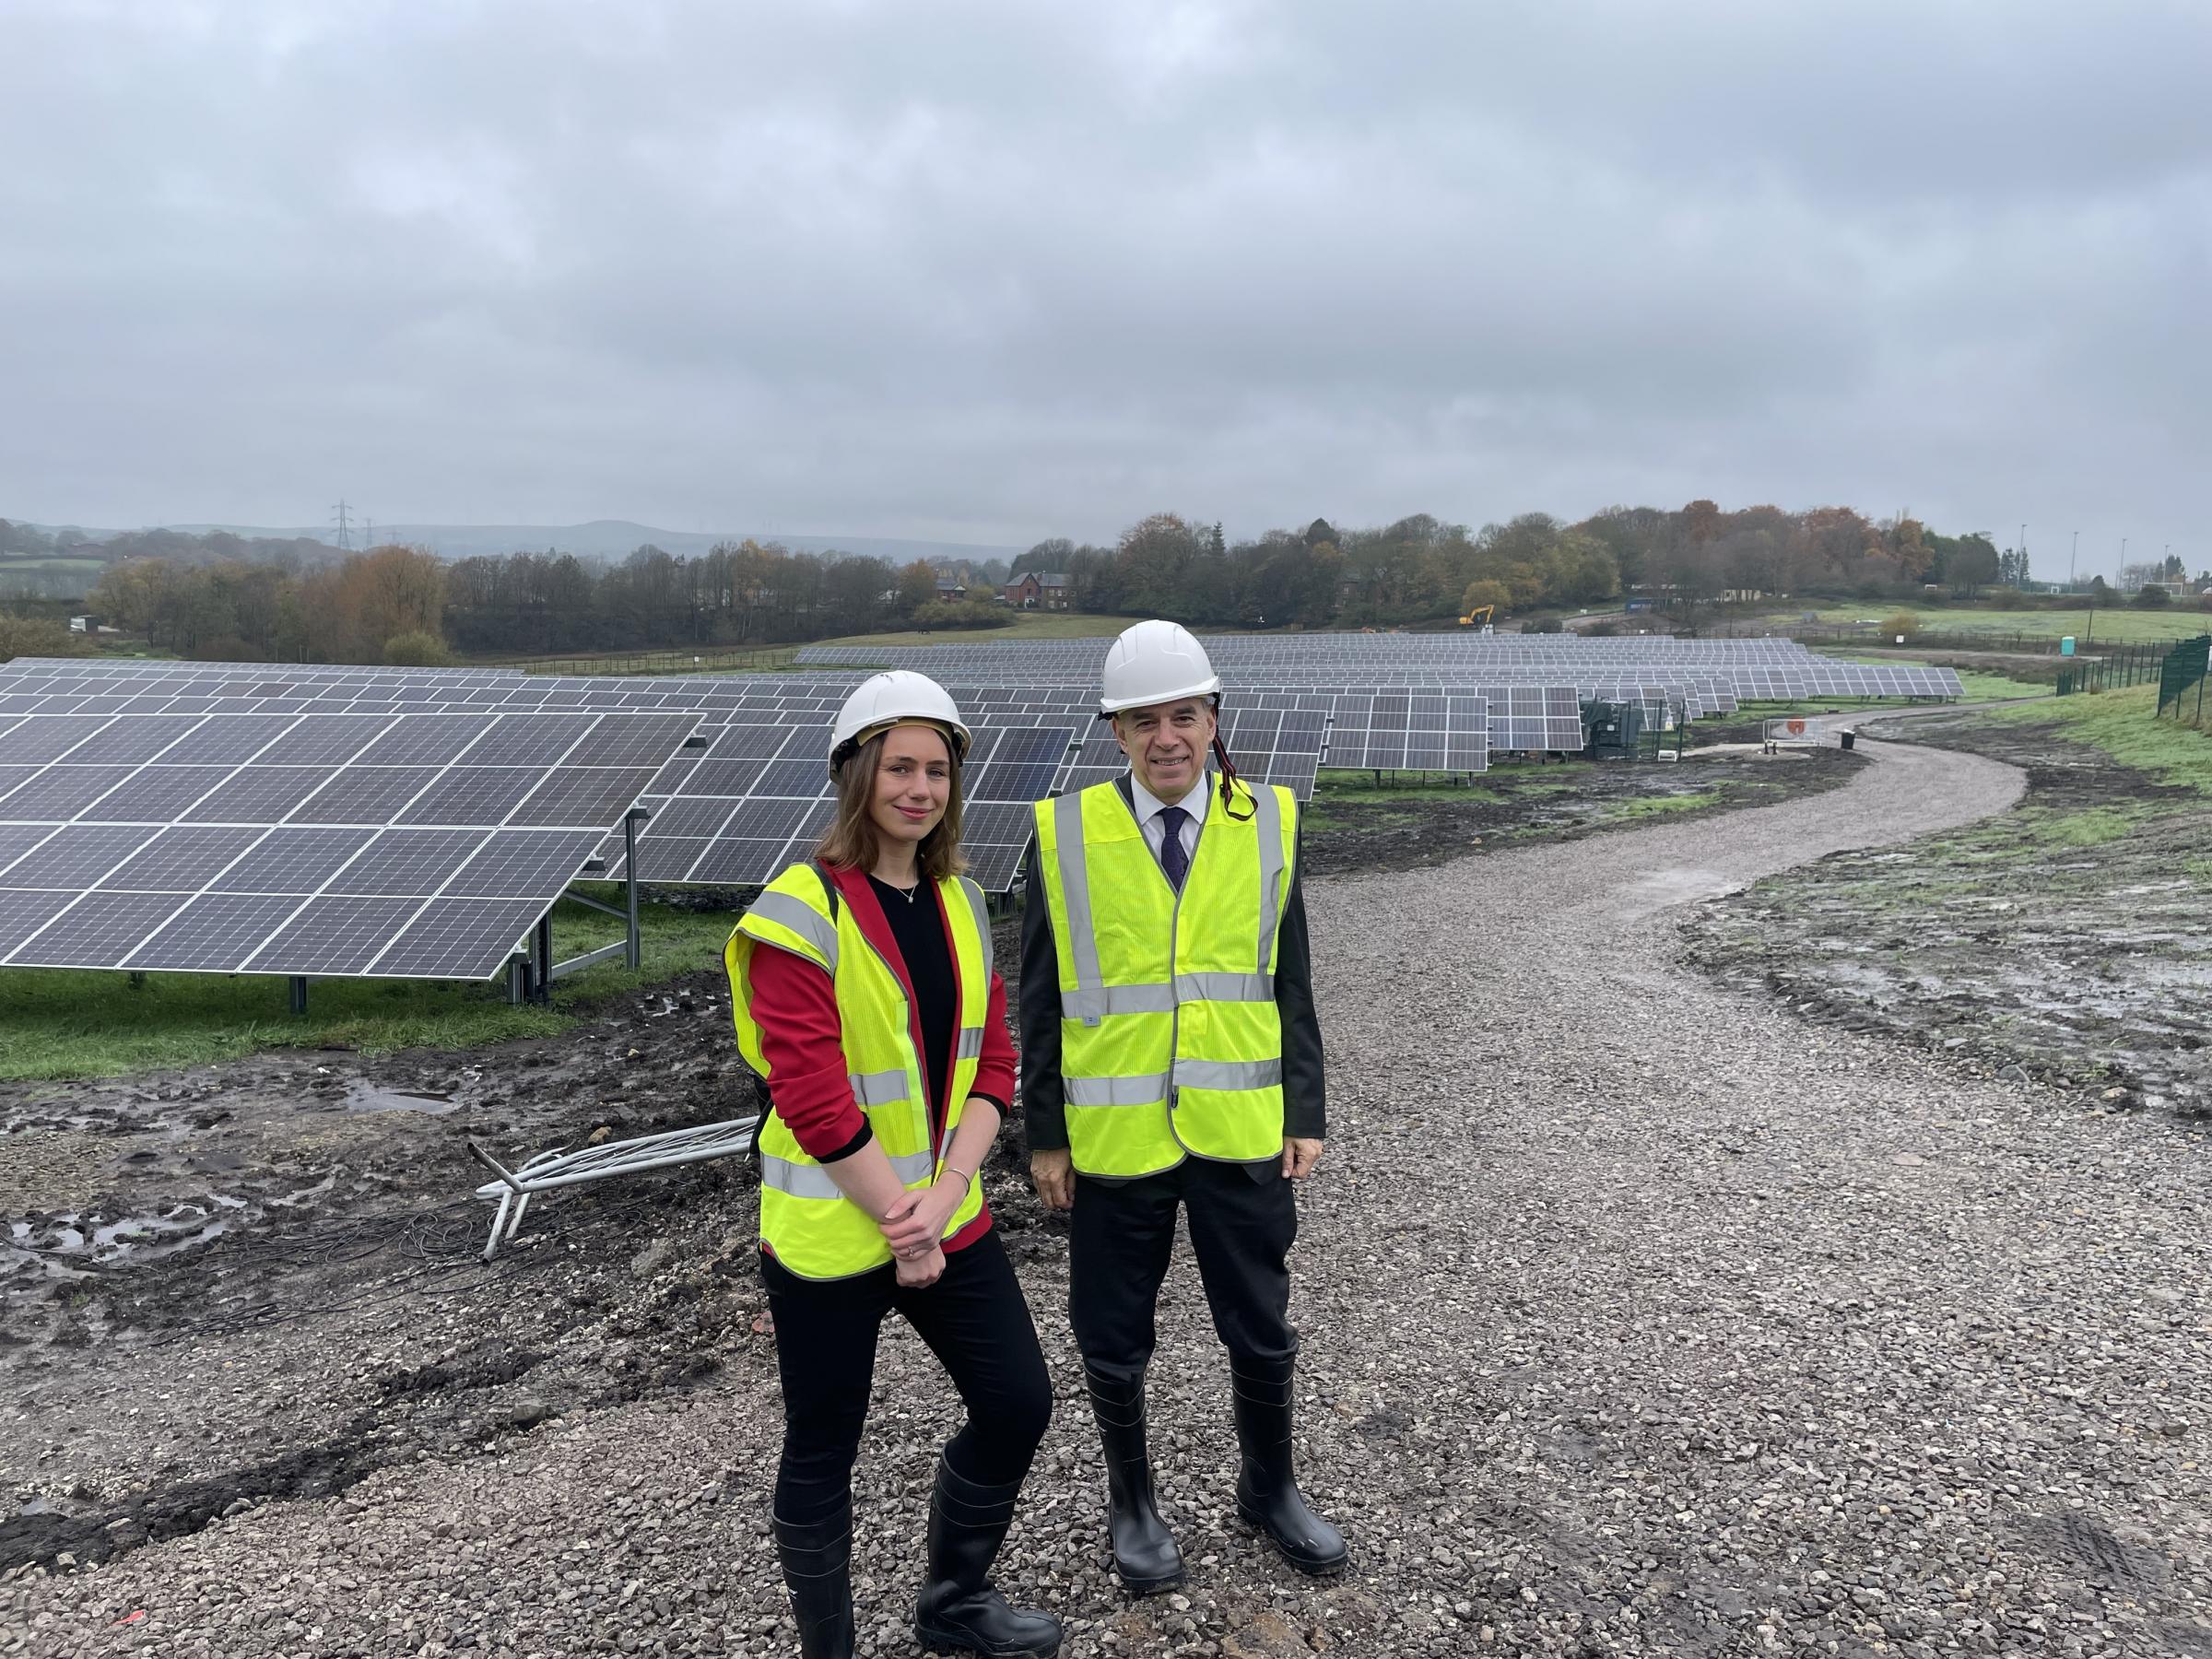 Elsie Blundell and Labour shadow minister Jeff Smith at the soon to be operational Chamber House solar farm in Heywood